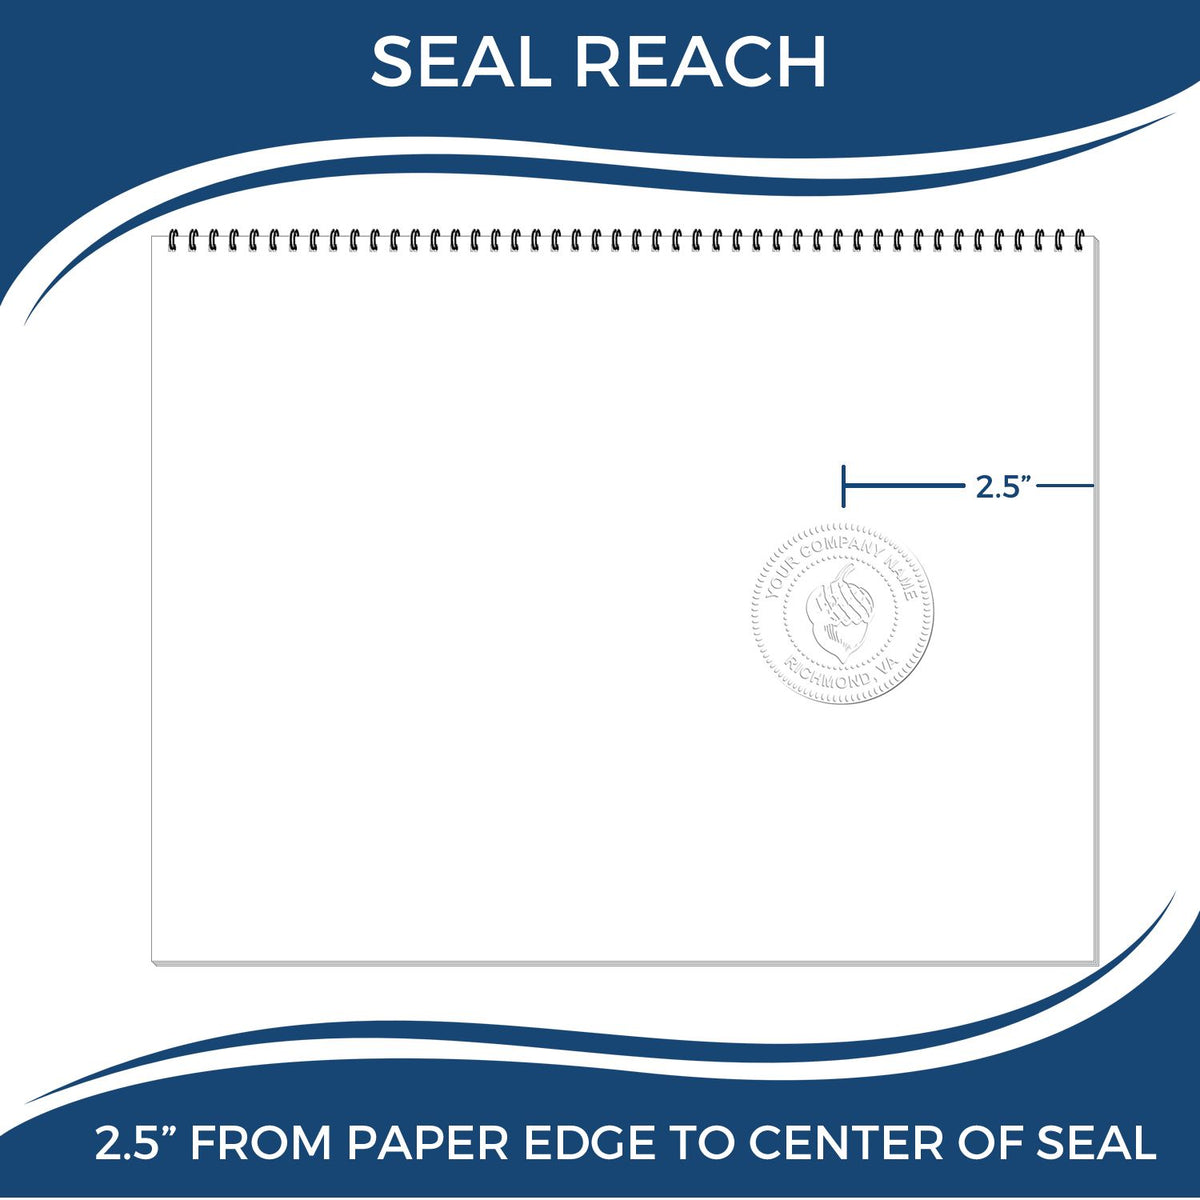 An infographic showing the seal reach which is represented by a ruler and a miniature seal image of the Long Reach Mississippi PE Seal